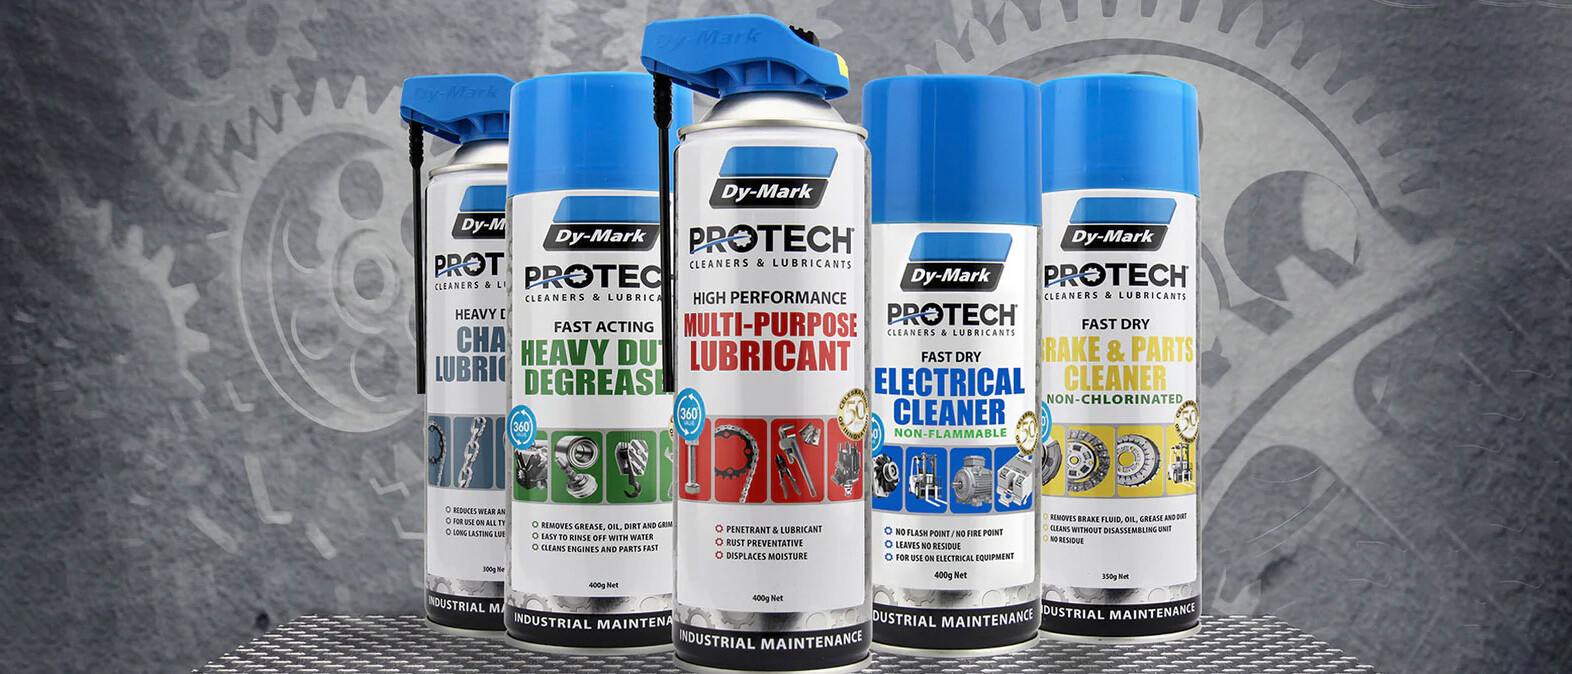 Dy-Mark Protech Cleaners and Lubricants Supplies Sydney